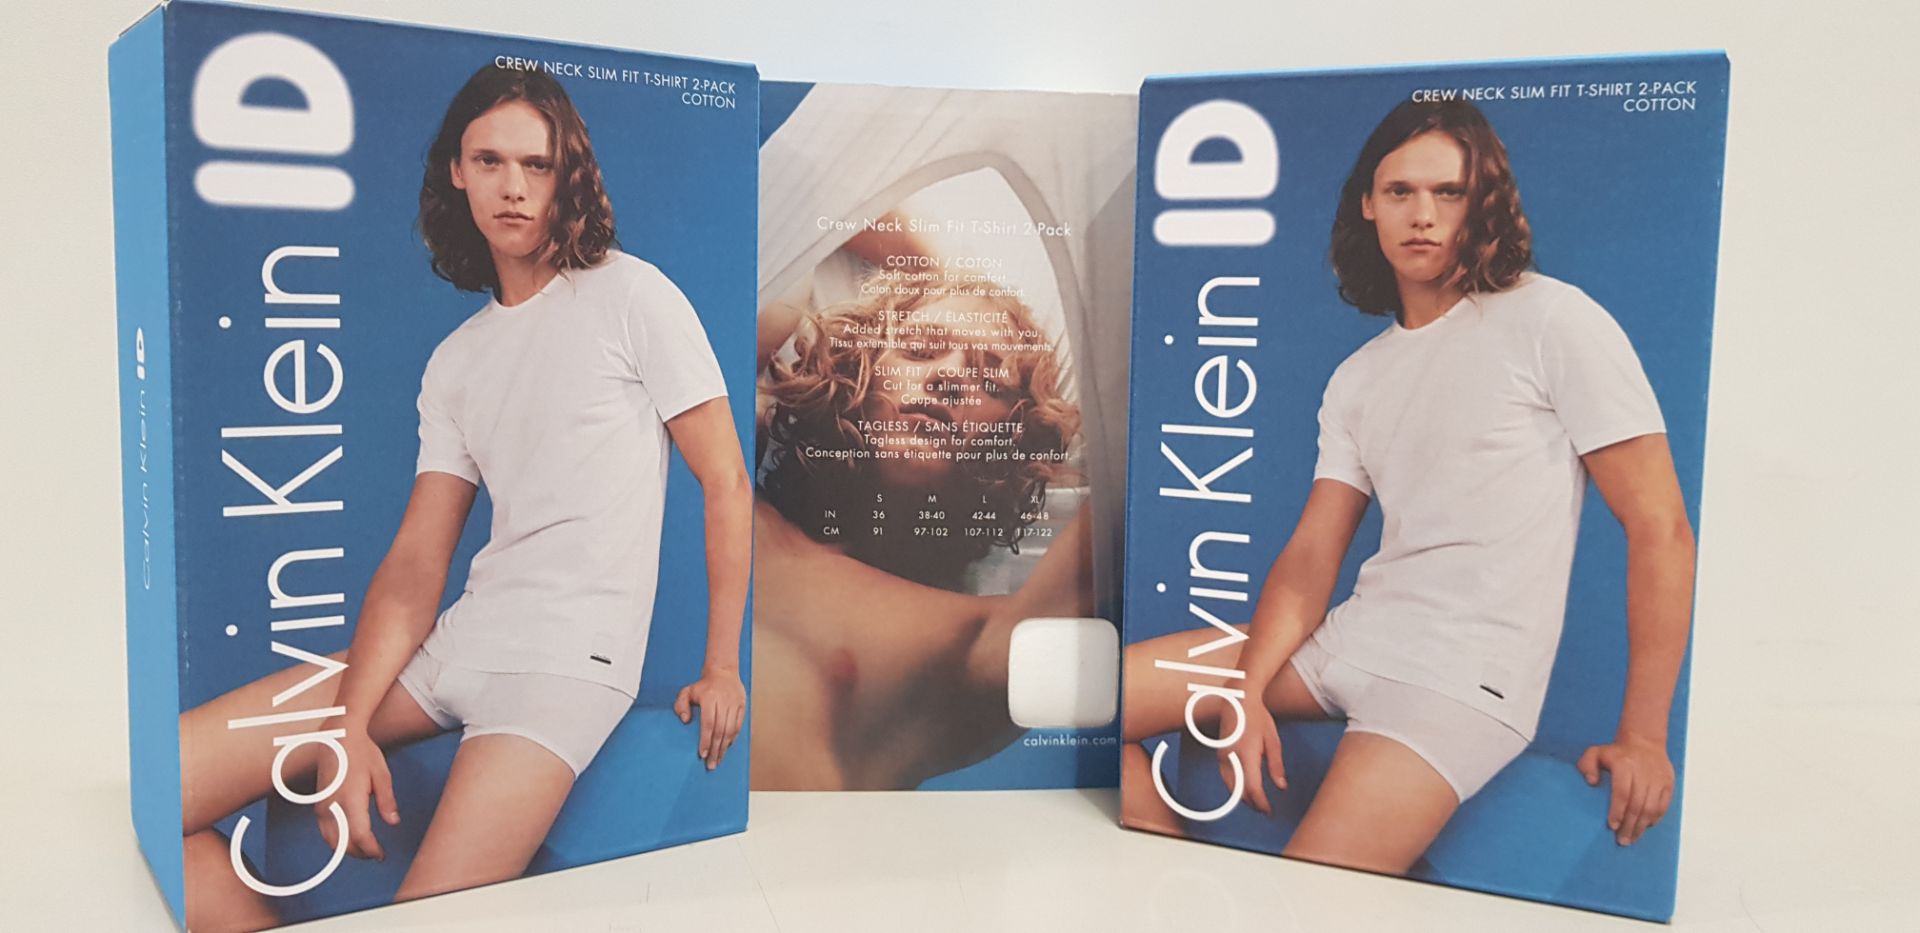 18 X BRAND NEW CALVIN KLEIN ID - PACK OF 2 WHITE CREW NECK SLIM FIT T-SHIRTS (COTTON) - ALL SIZE